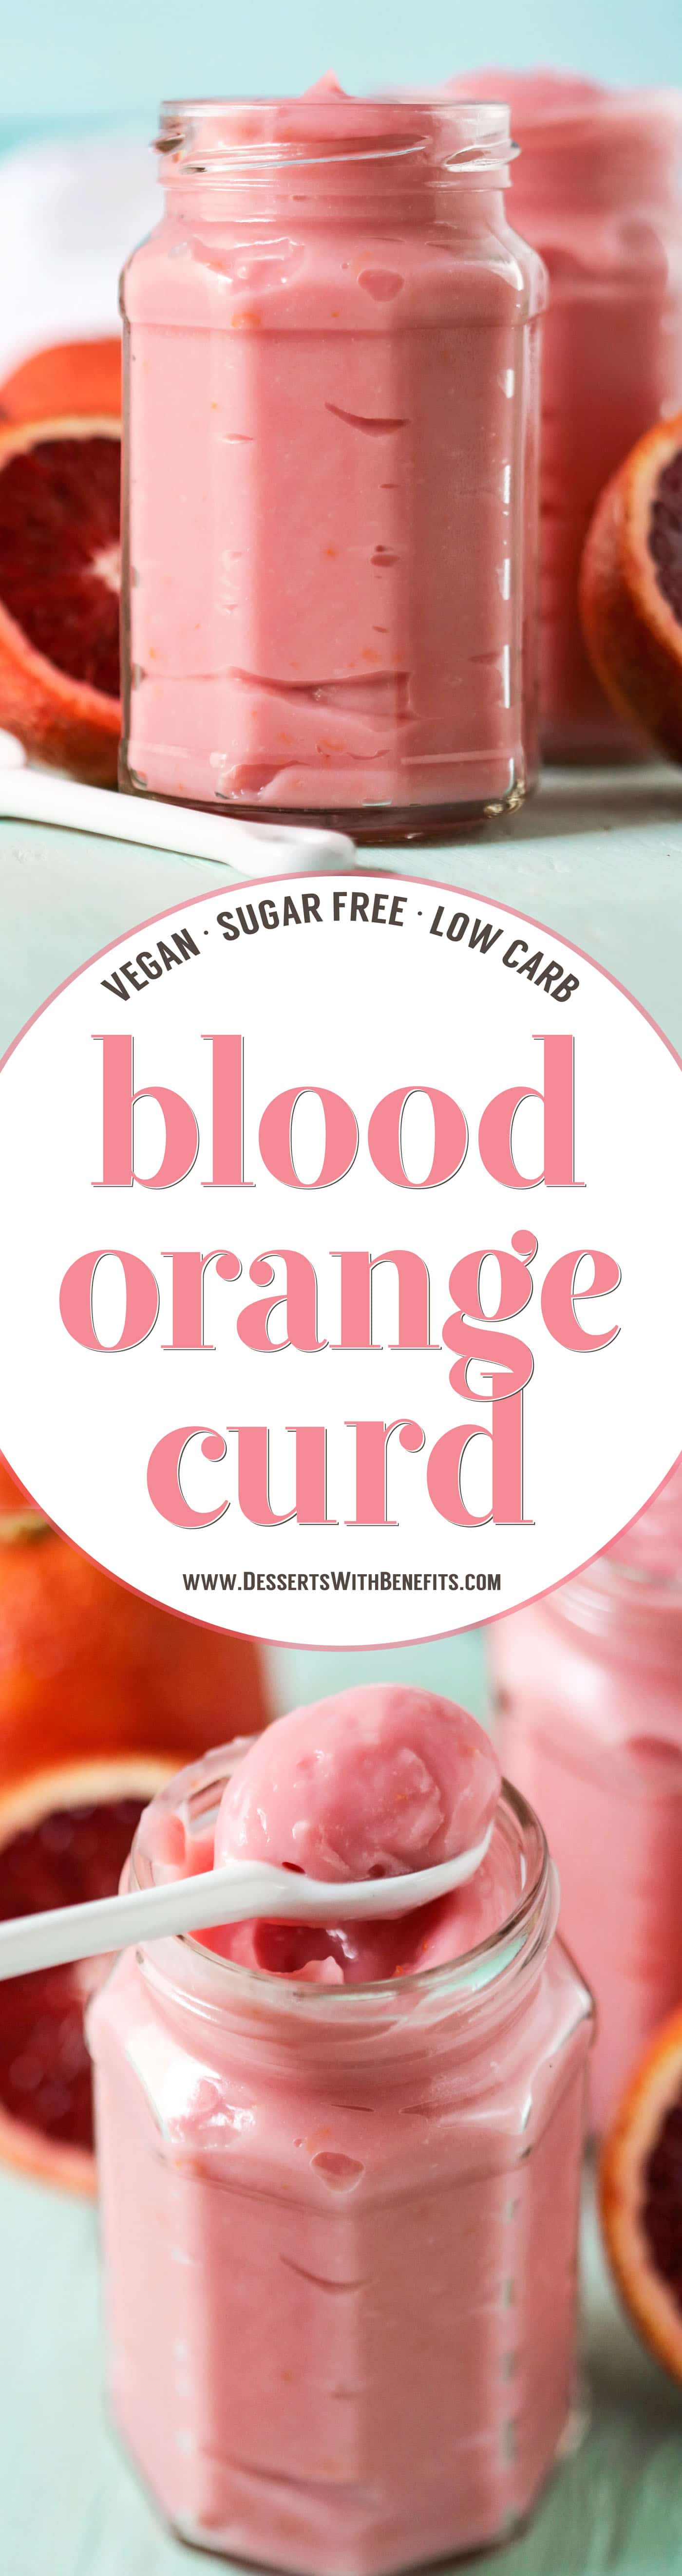 This Healthy Blood Orange Curd is ultra creamy, sweet, tart, and delicious.  You'd never know it's sugar free, low carb, low fat, gluten free, dairy free, and vegan!  Scoop it over yogurt, layer it in parfaits, spoon some over Vanilla Ice Cream, or dig in straight up with a spoon.